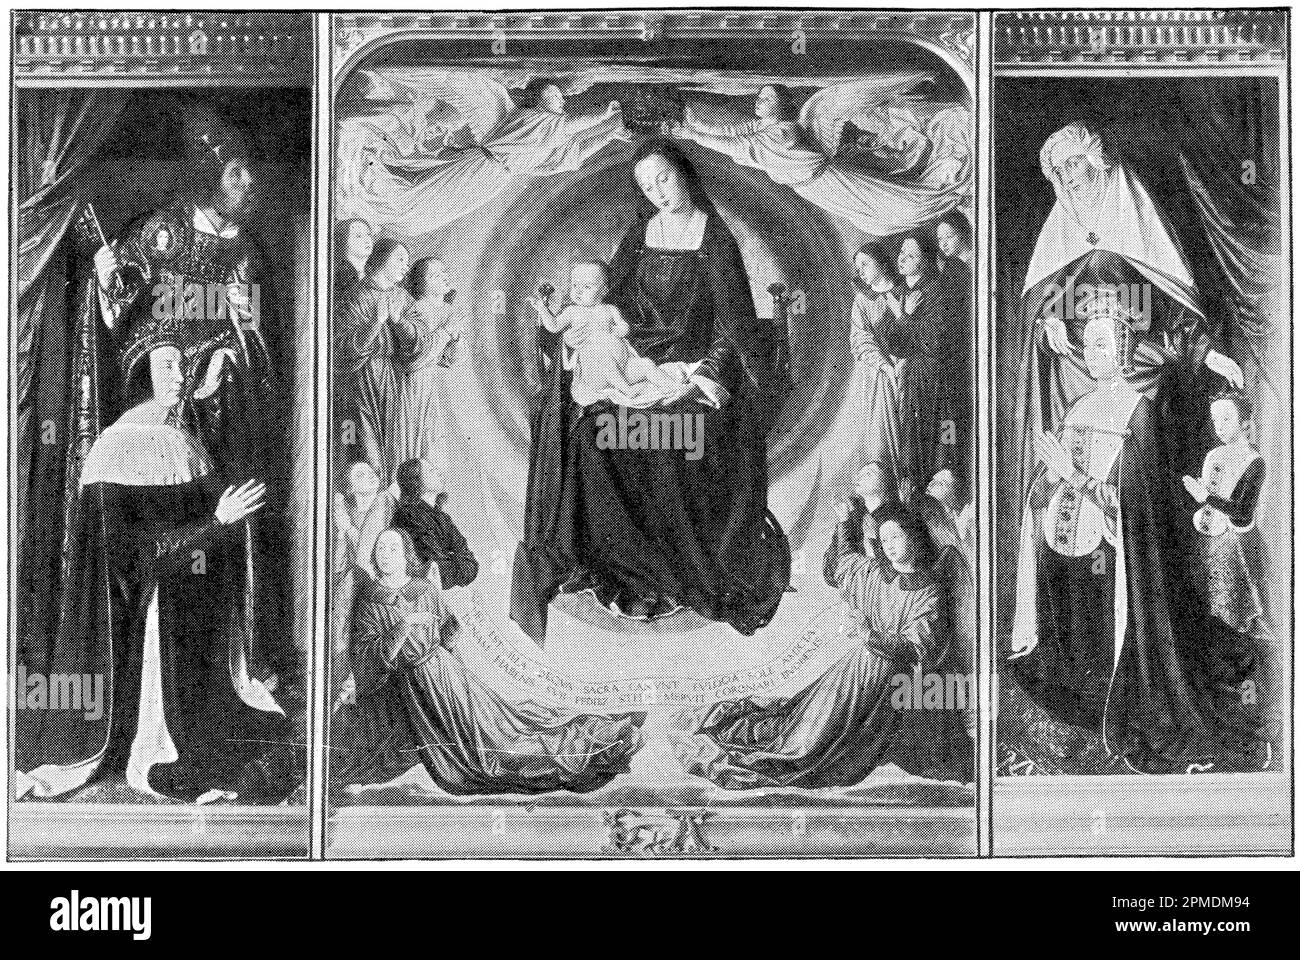 The Moulins Triptych in Moulins Cathedral by an Early Netherlandish painter Jean Hey (Master of Moulins). Publication of the book 'Meyers Konversations-Lexikon', Volume 2, Leipzig, Germany, 1910 Stock Photo